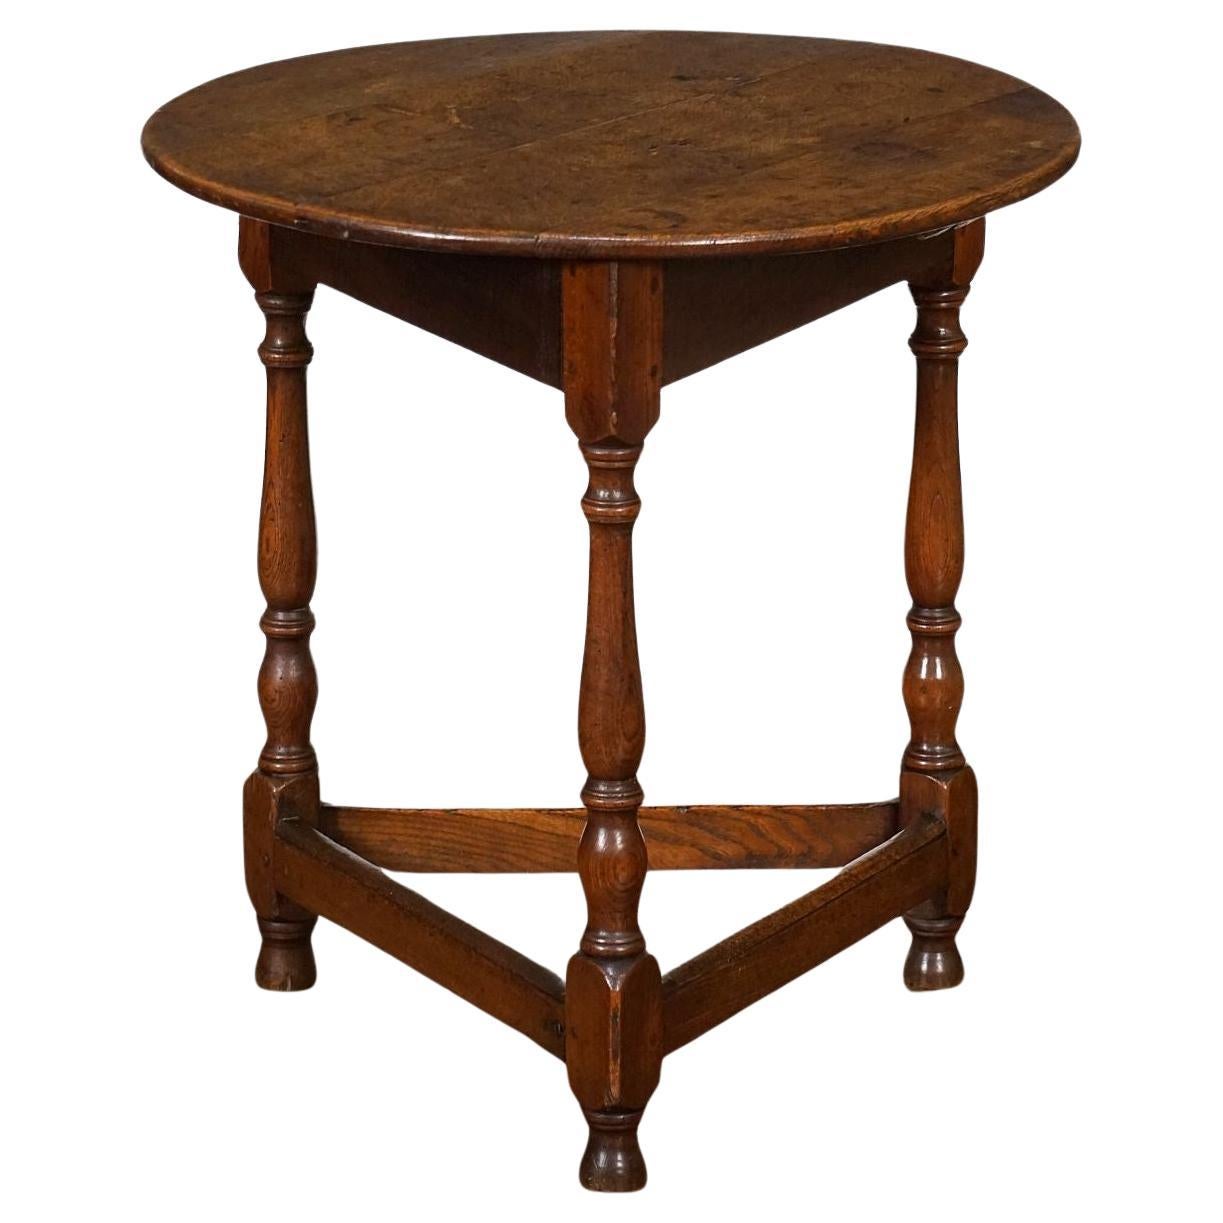 English Cricket Table of Oak and Ash from the George III Period